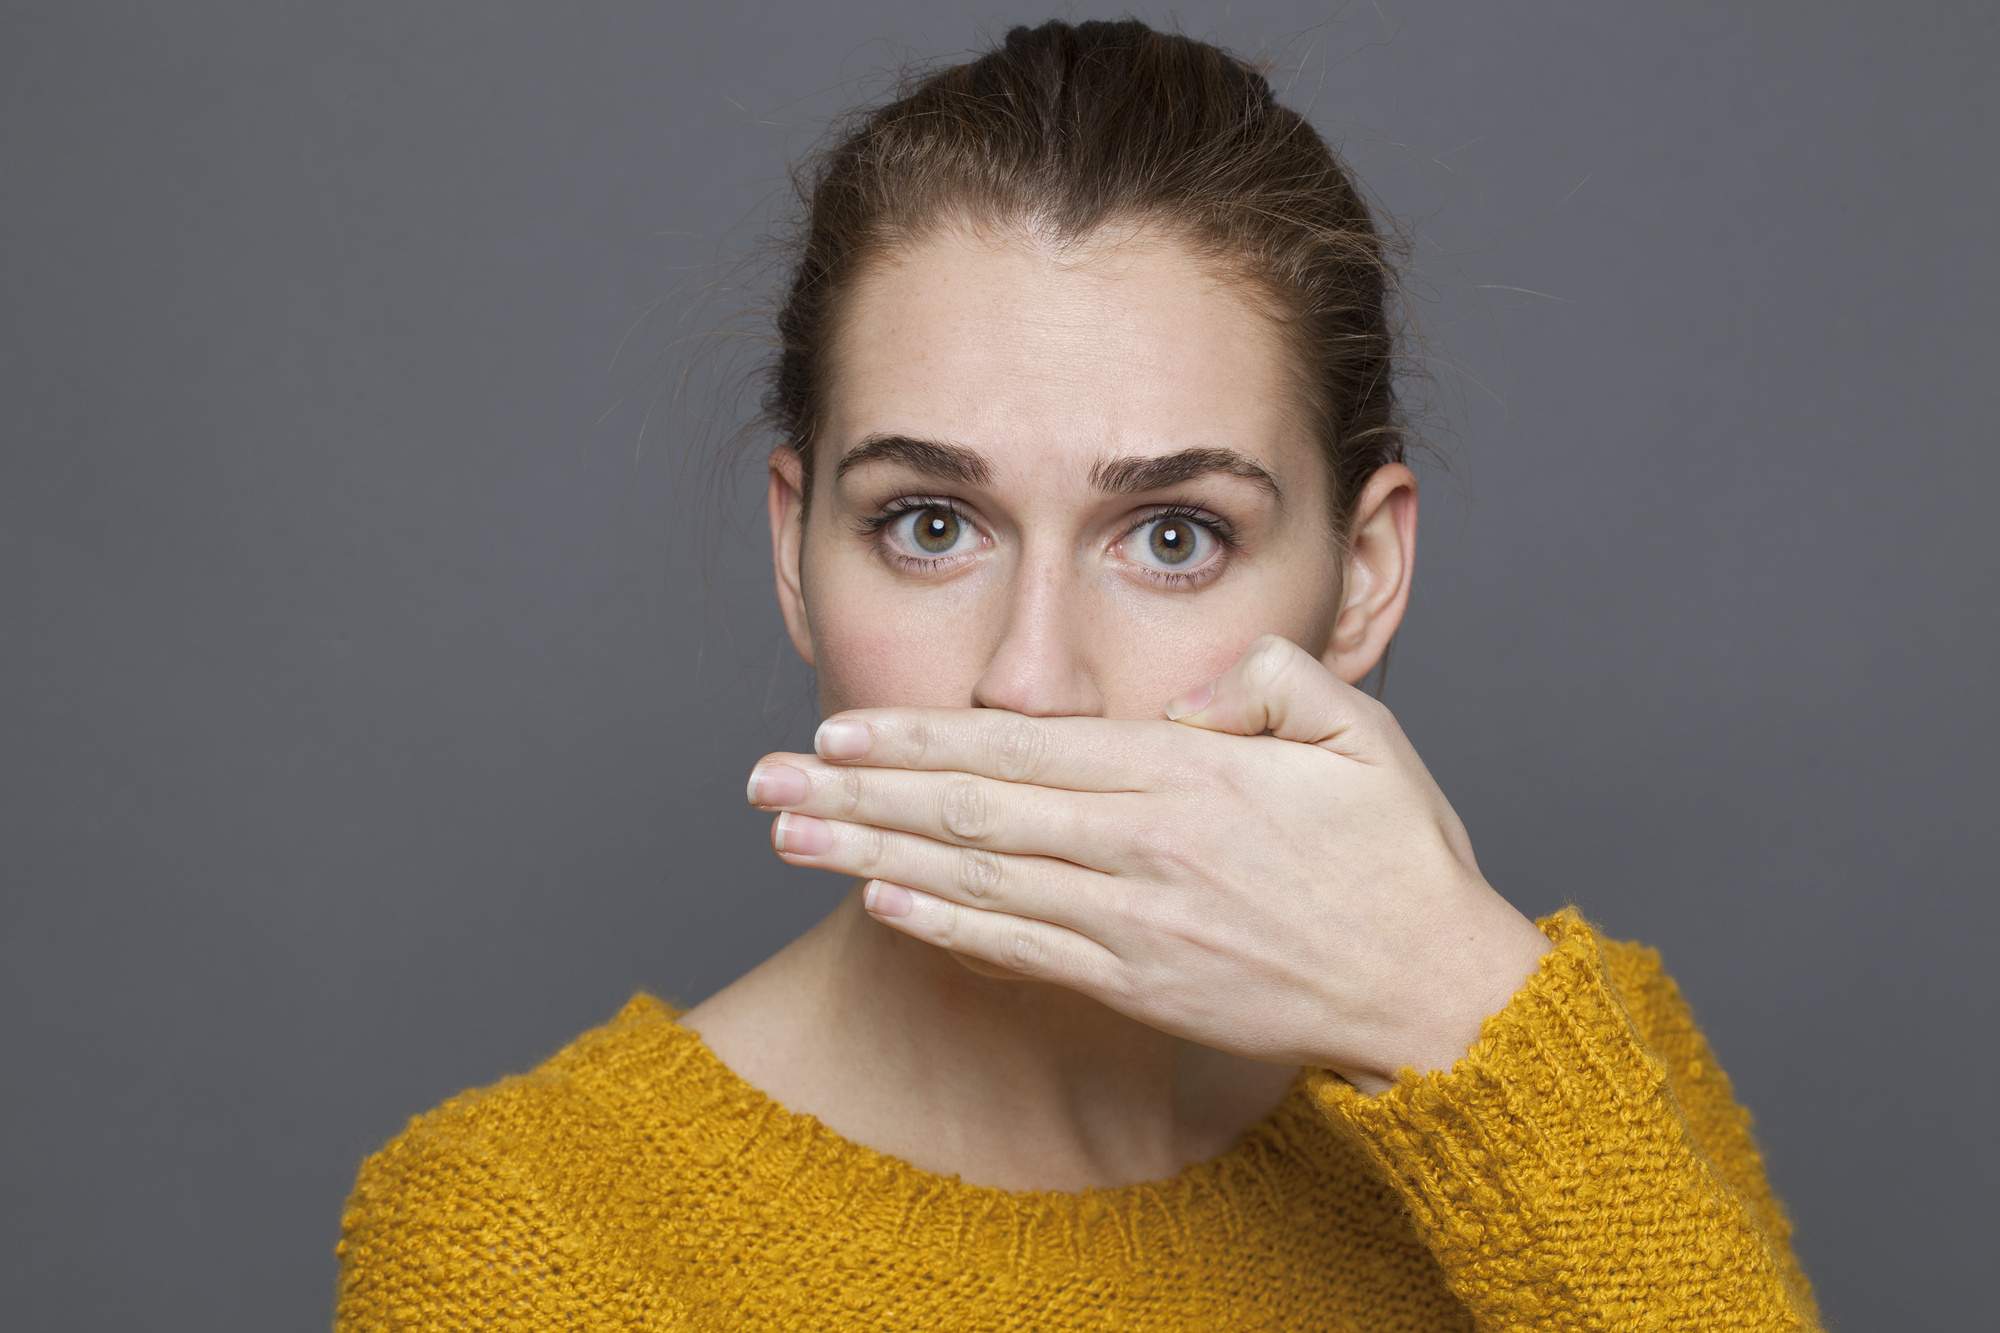 4 Icky Signs You Have Pretty Bad Hygiene